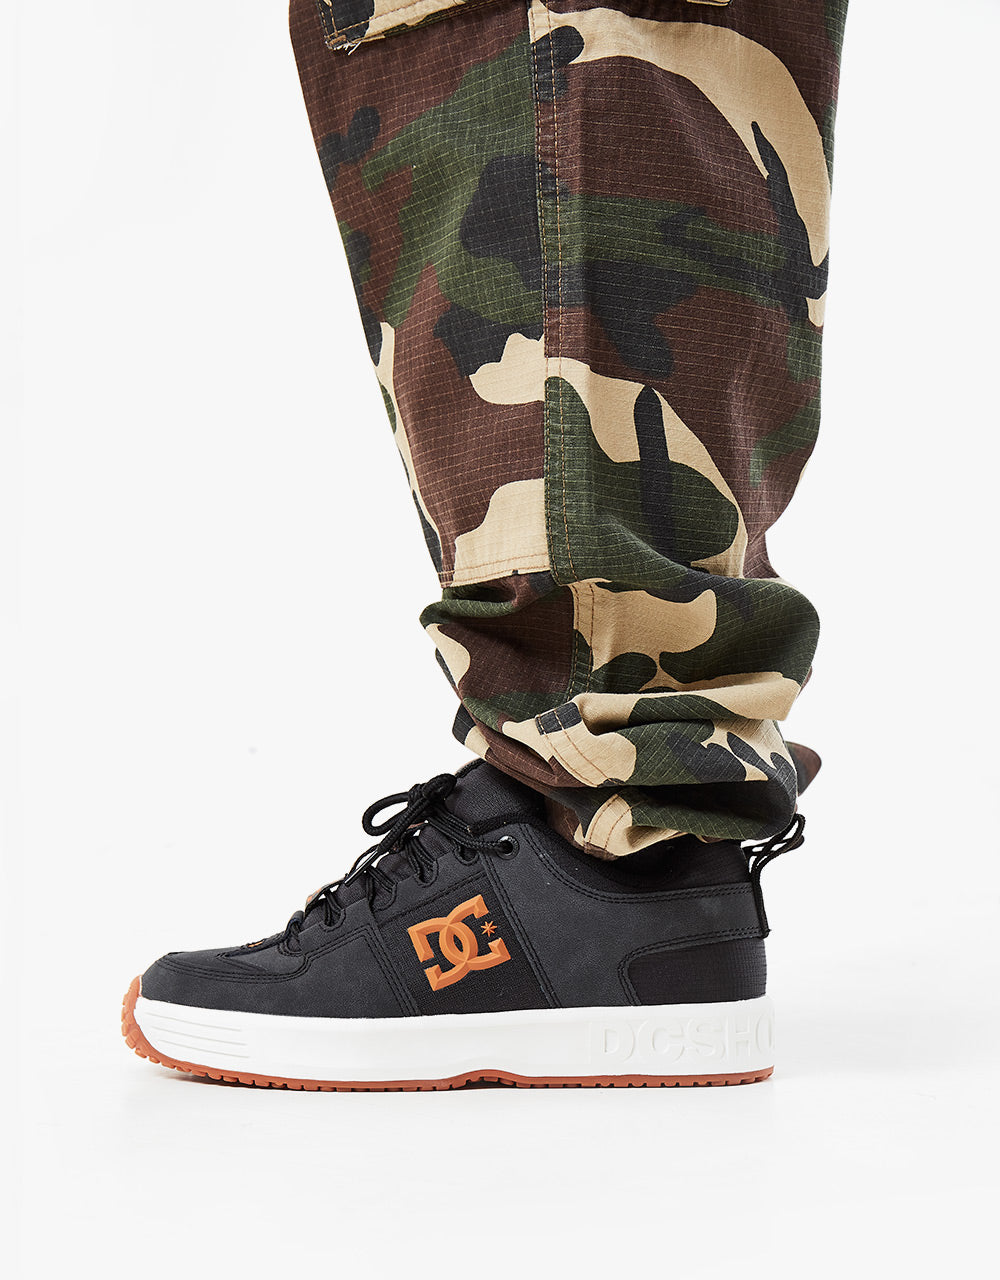 Dickies Eagle Bend Cargo Pant - Camouflage